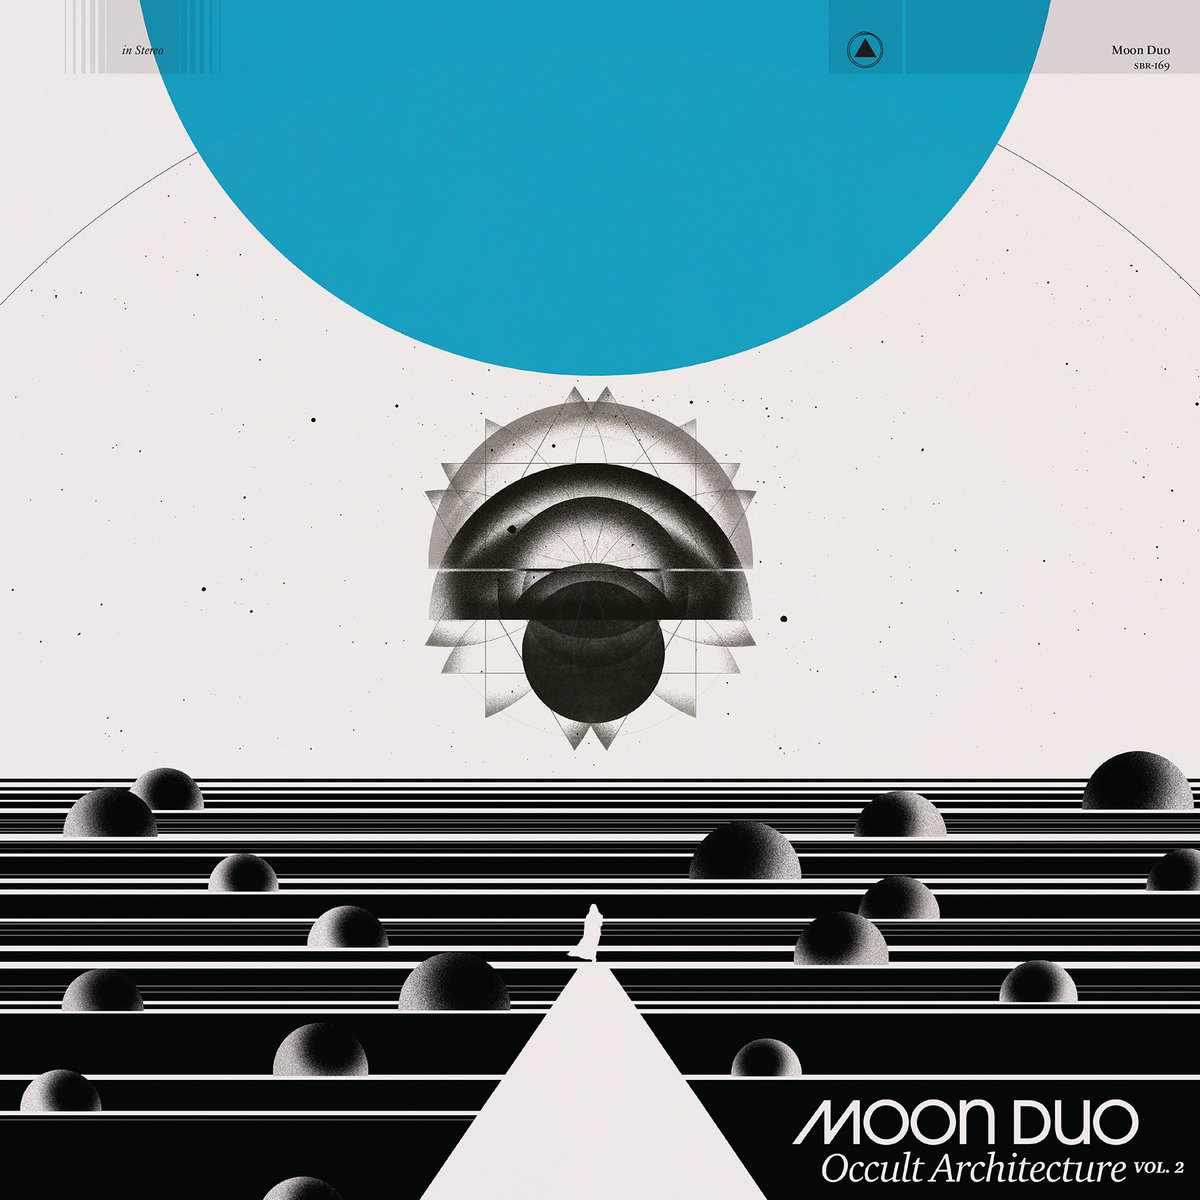 Moon Duo "Occult Architecture Vol. 2"